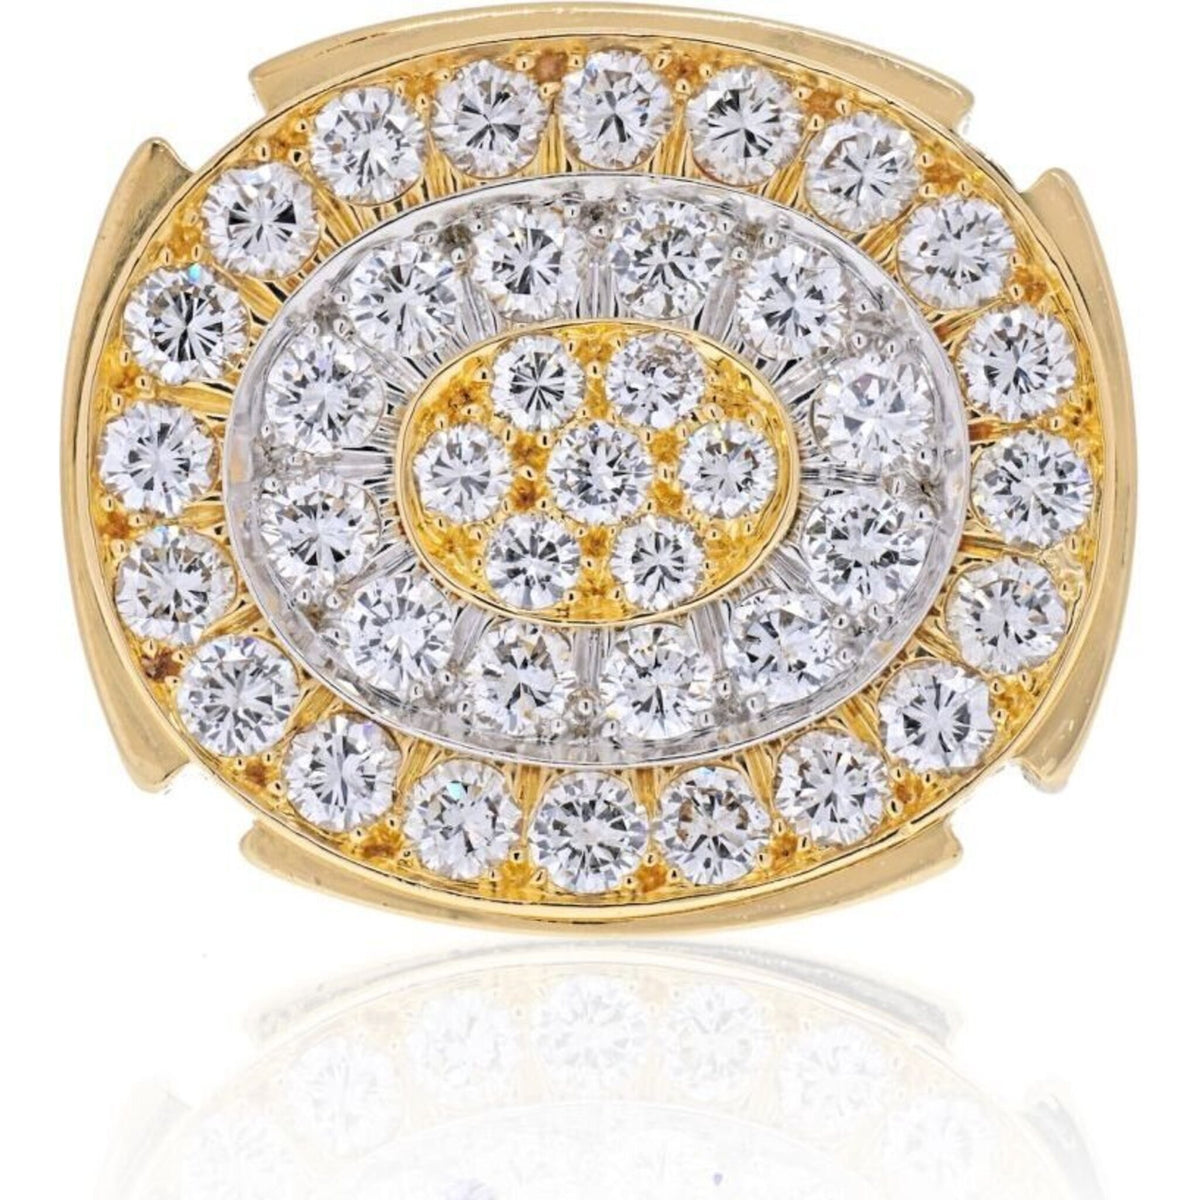 Van Cleef & Arpels Perlee Clover Ring in 18K Yellow Gold 0.71 ctw - Fashion Ring / Yellow Gold | Pre-owned & Certified | used Second Hand | Unisex